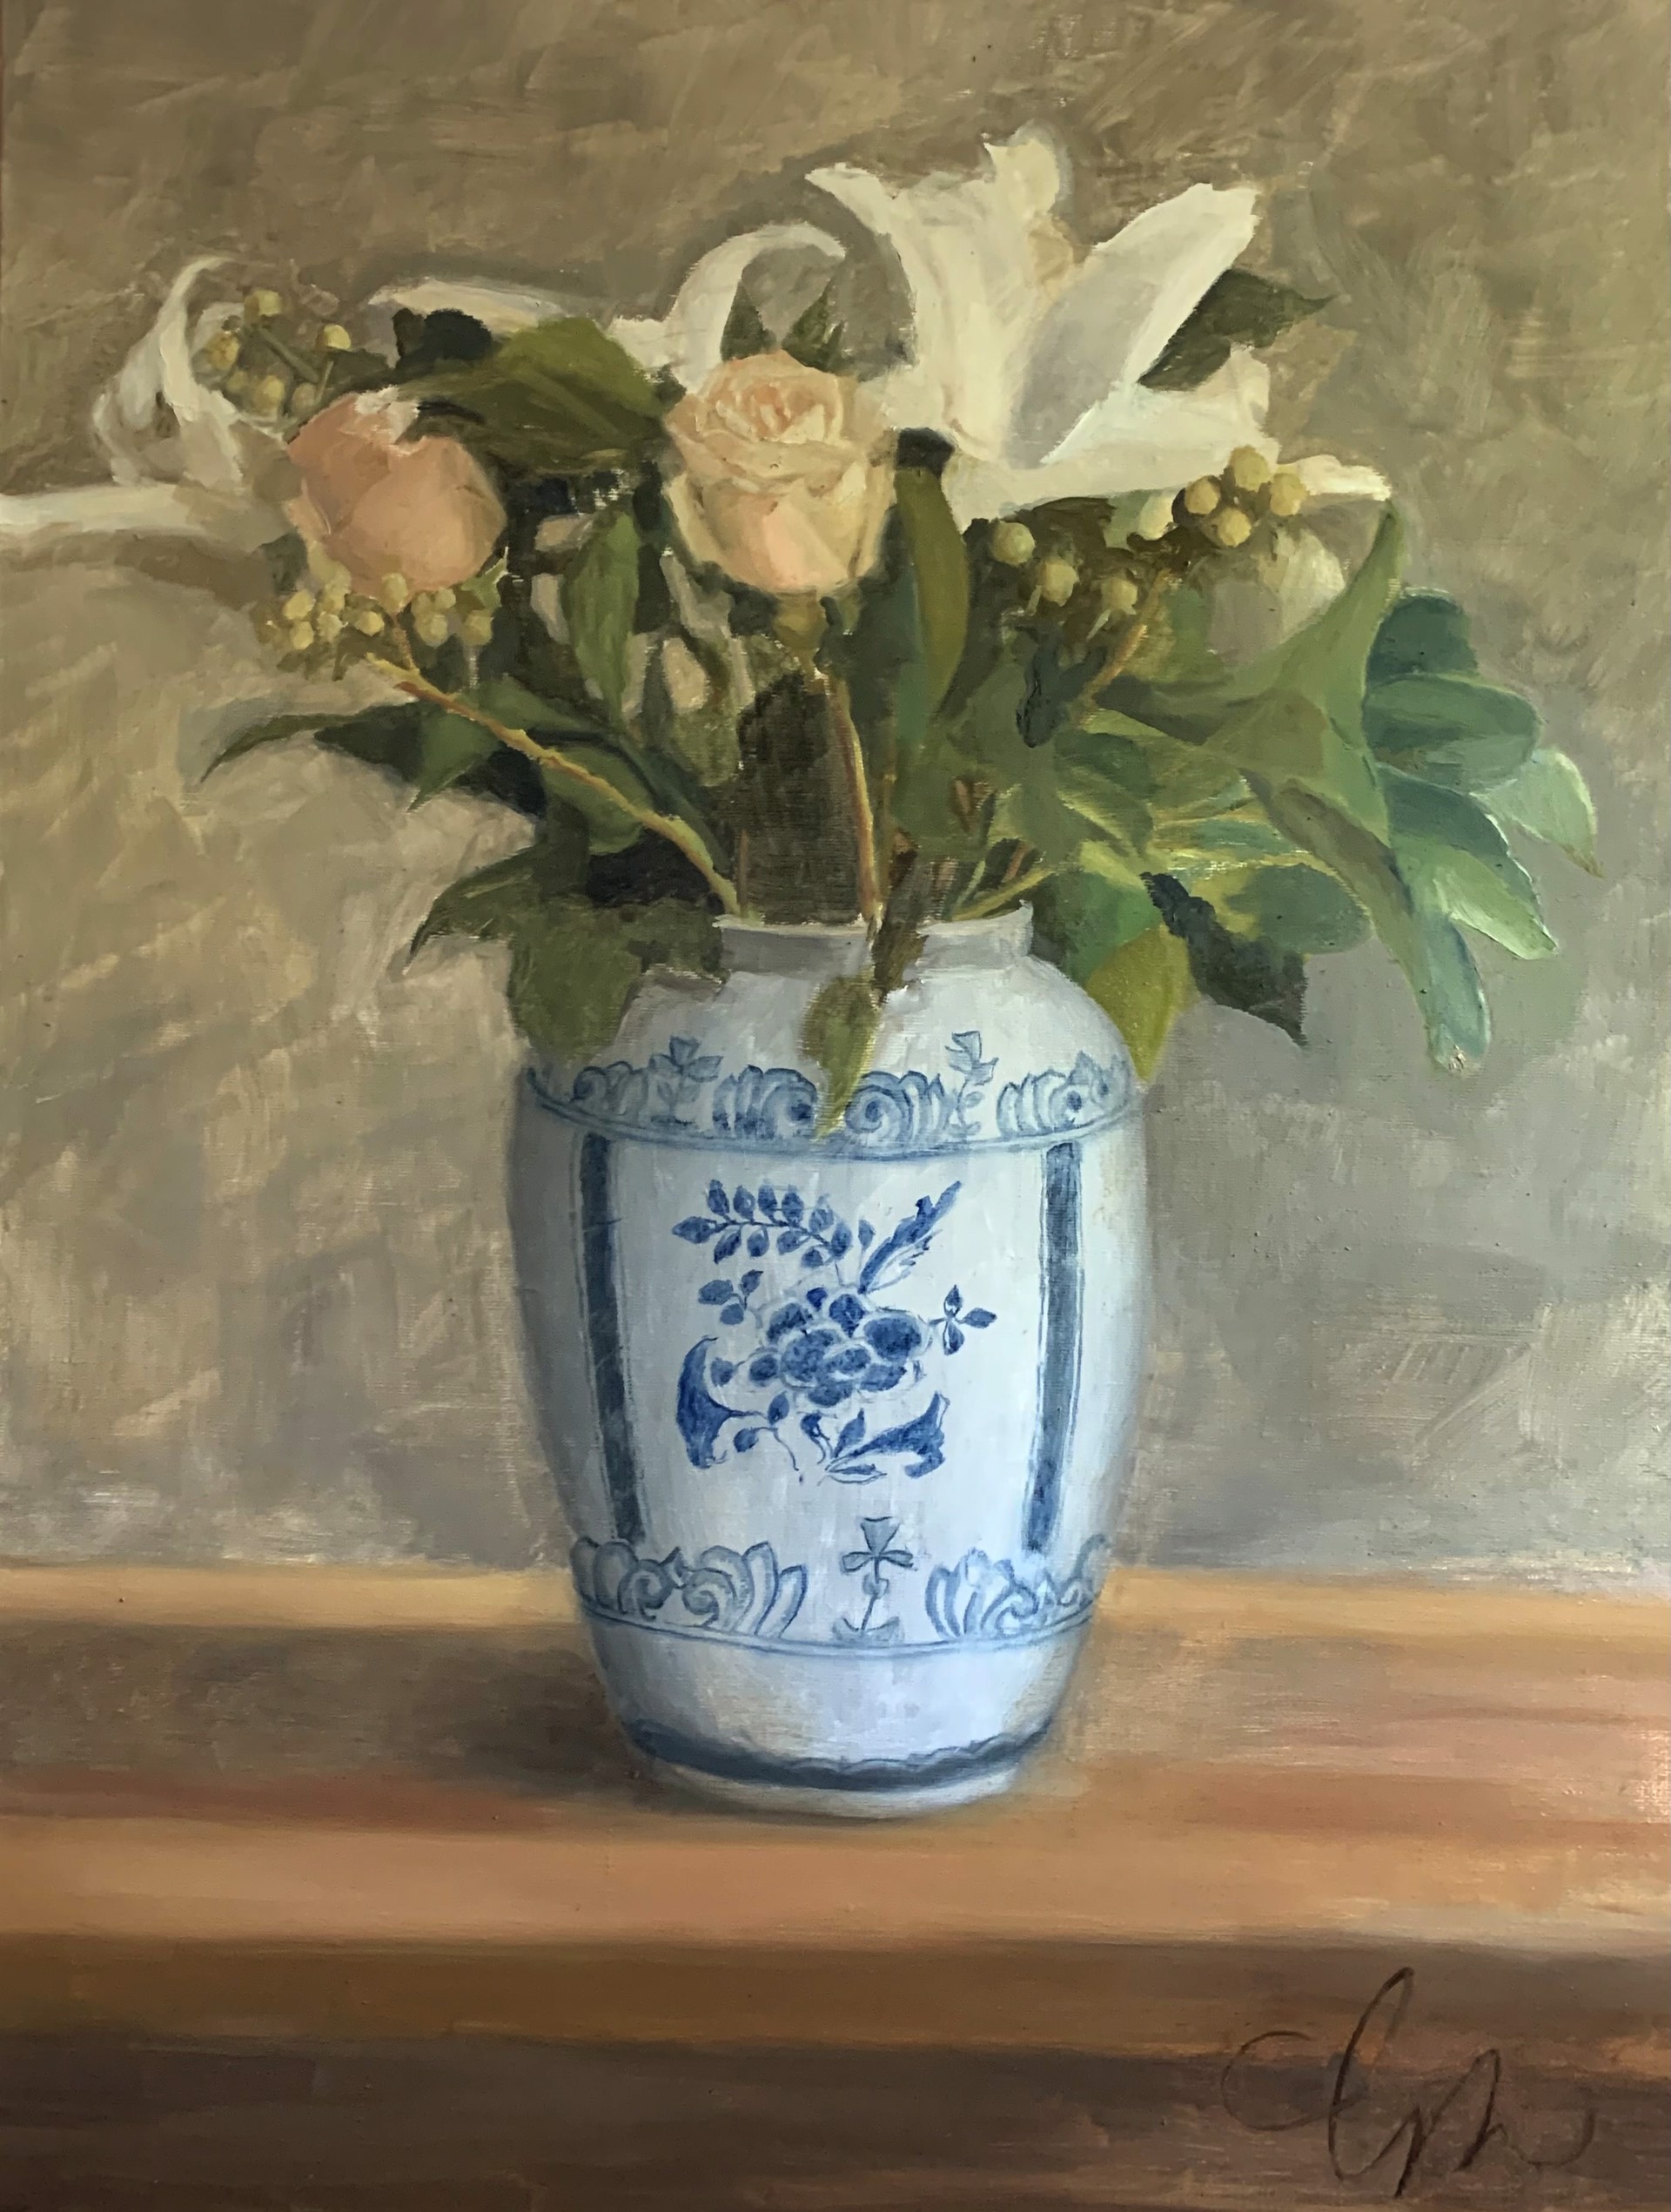 Lilies, Roses, Delft Vase by Laura Murphey